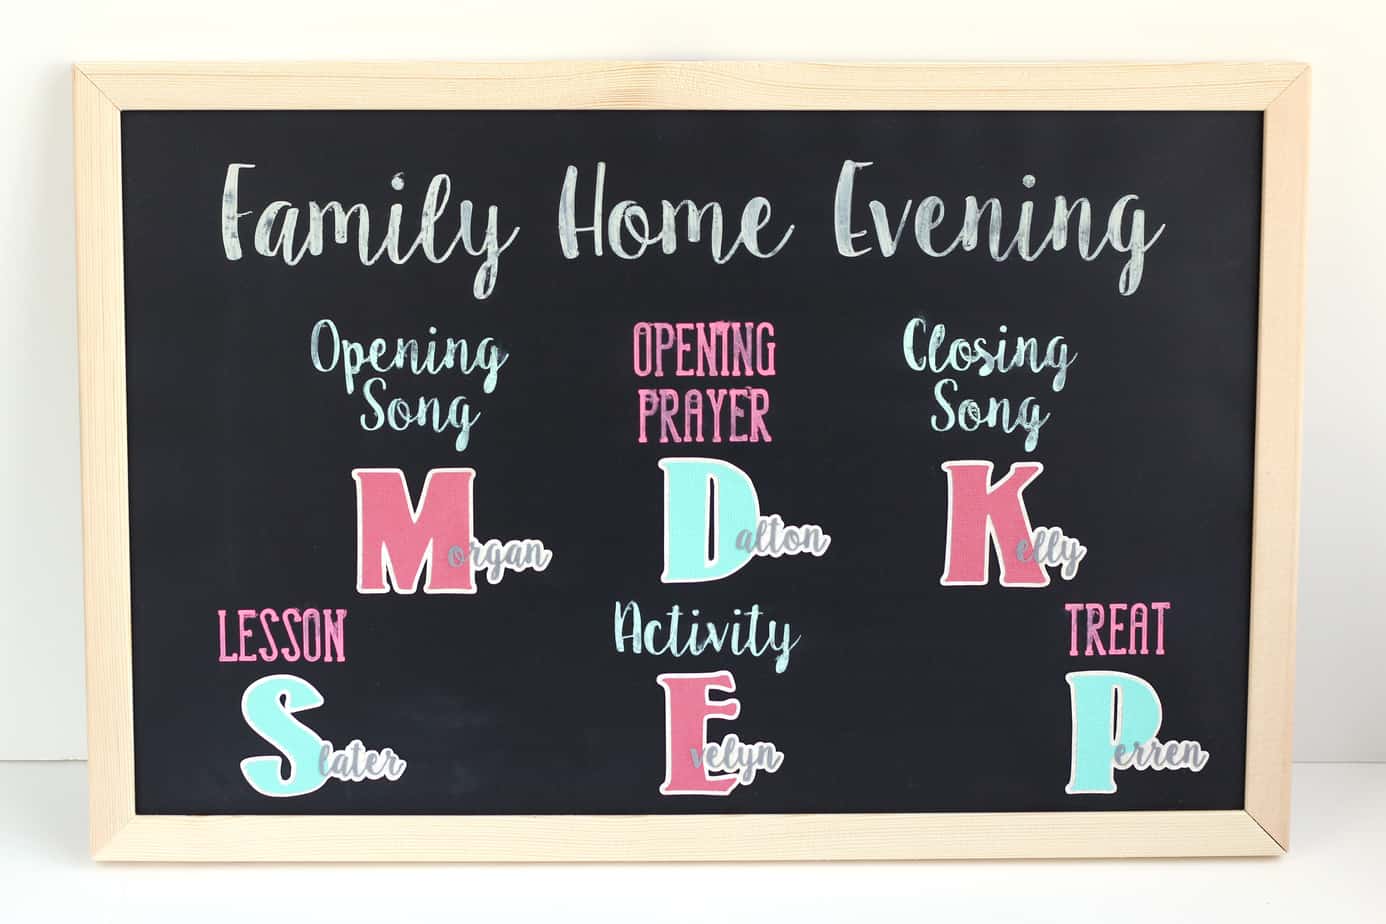 Family Home Evening Board